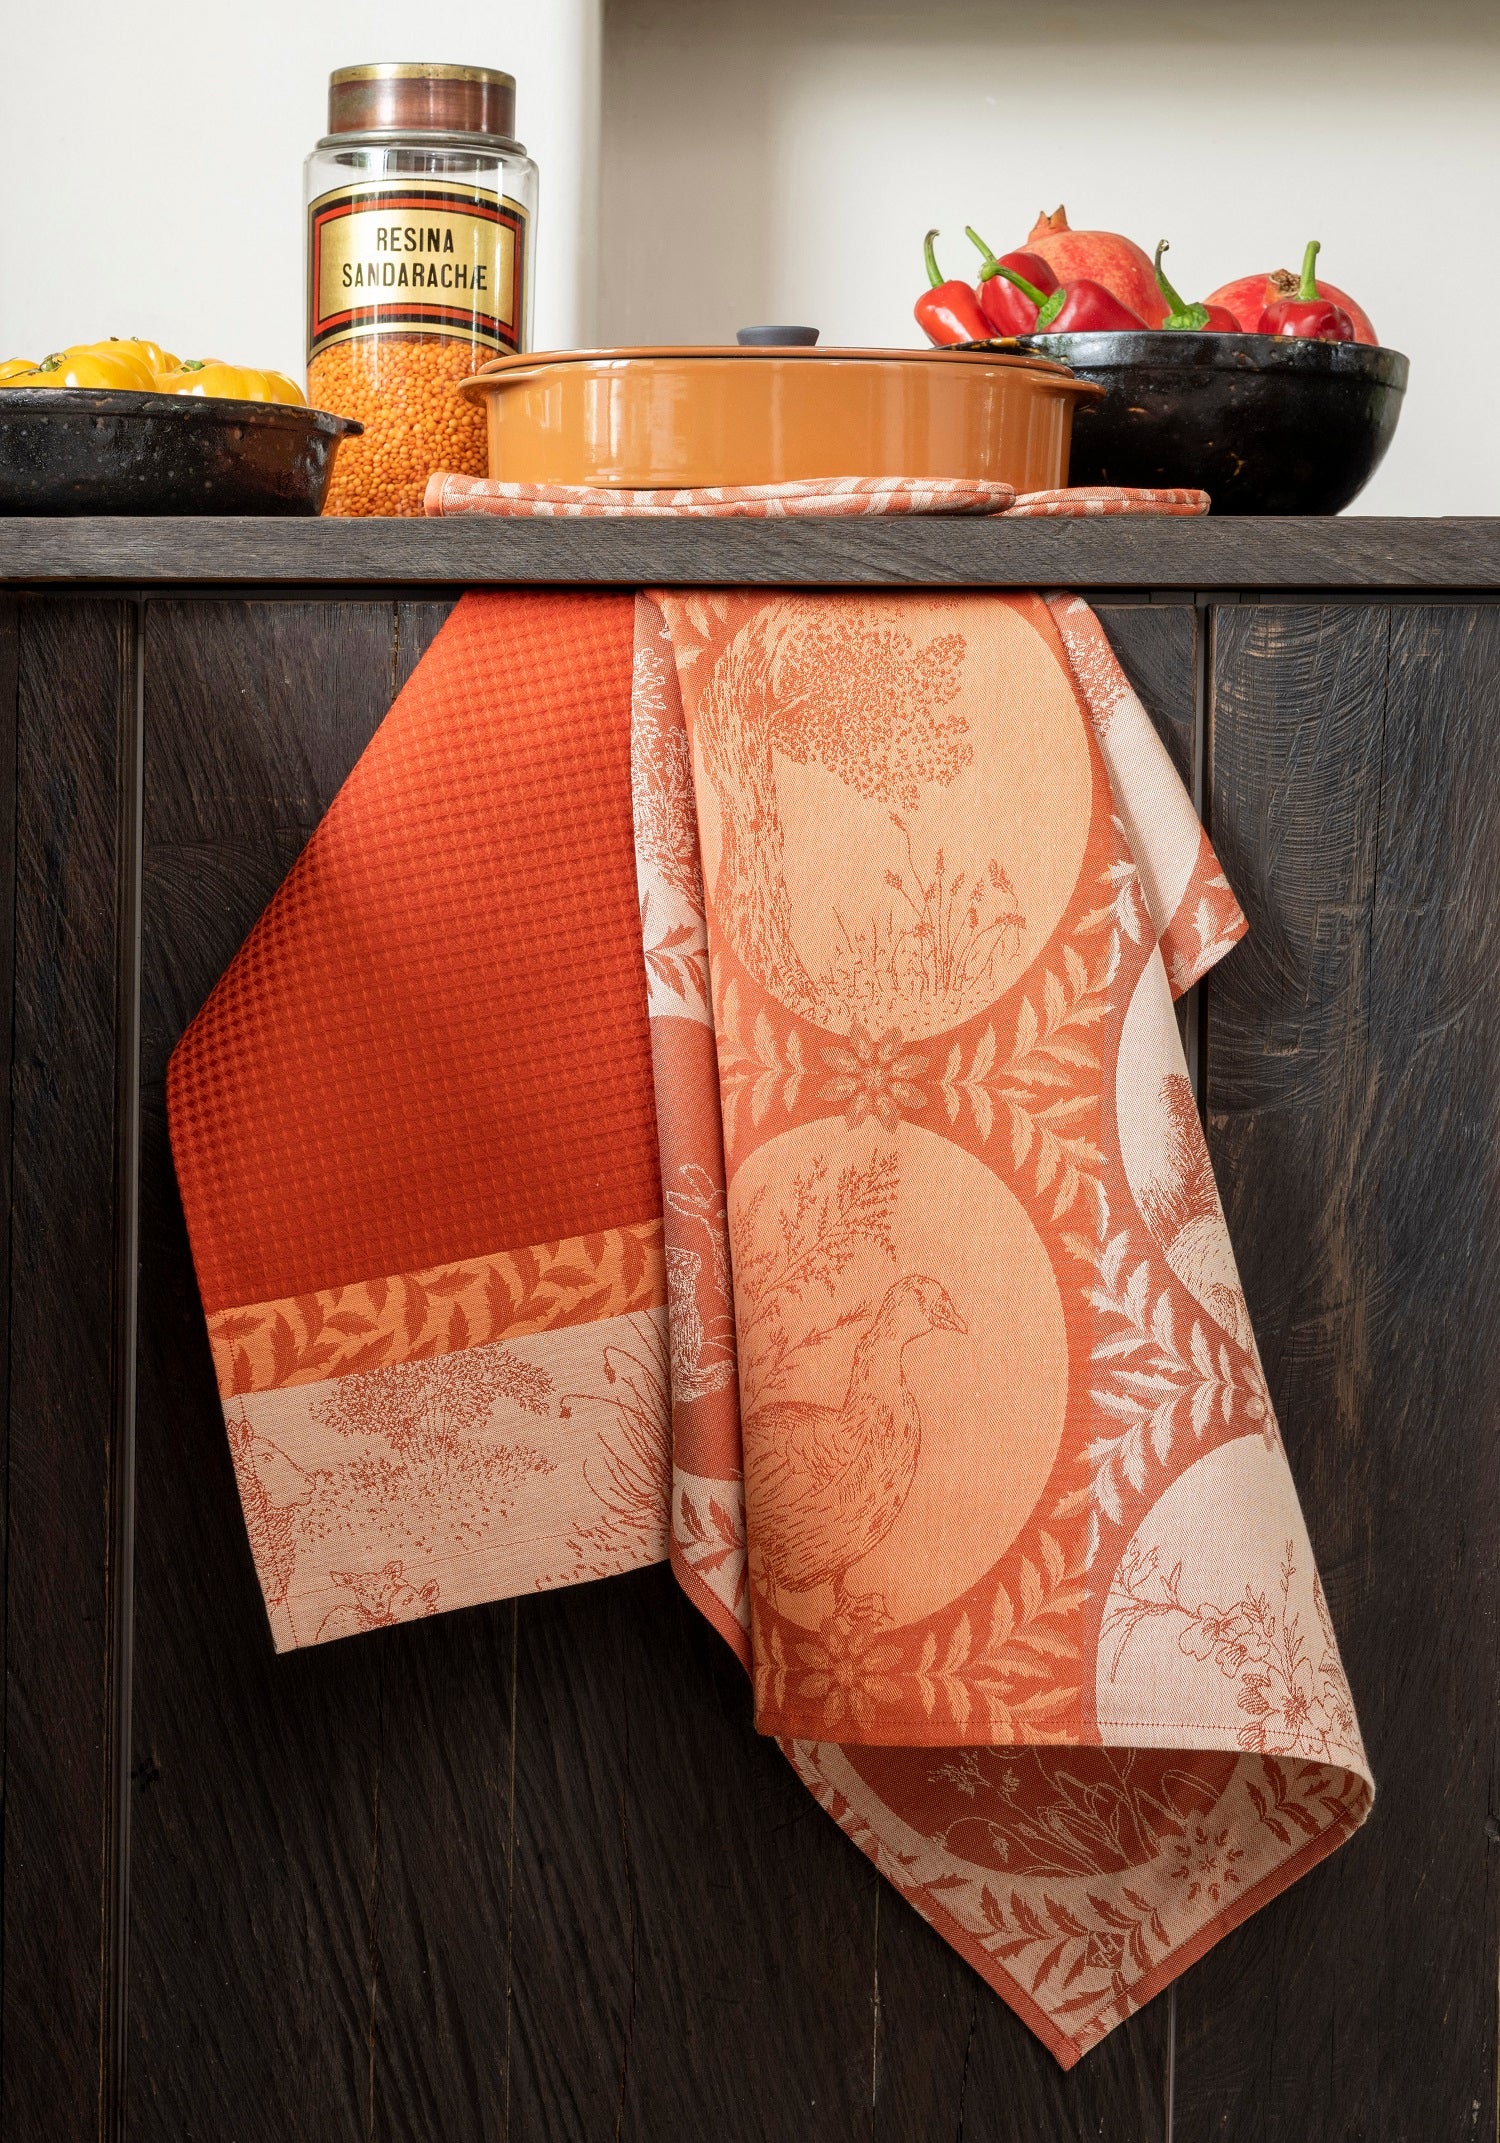 Jacquard Francais "Josephine" (Red), Woven cotton tea towel. Made in France.